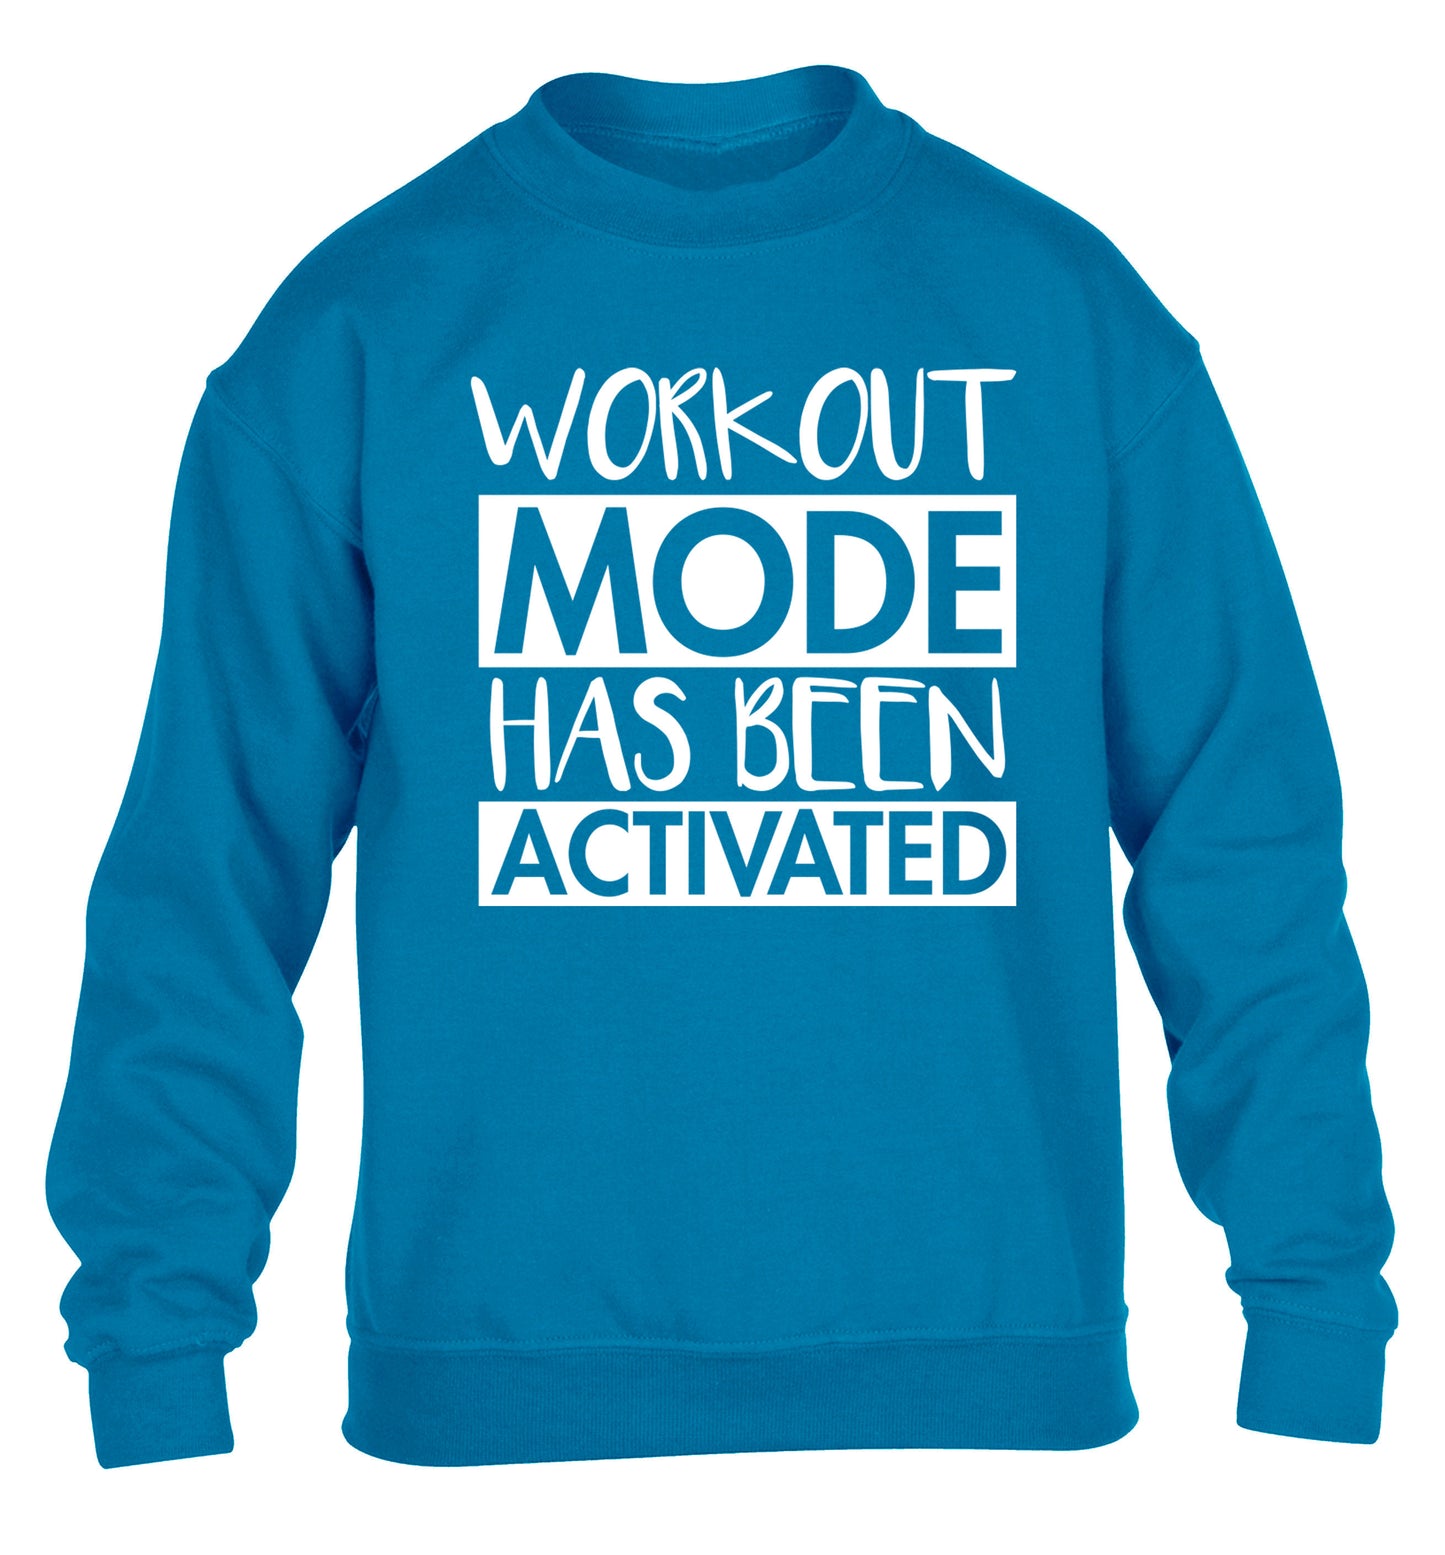 Workout mode has been activated children's blue sweater 12-14 Years